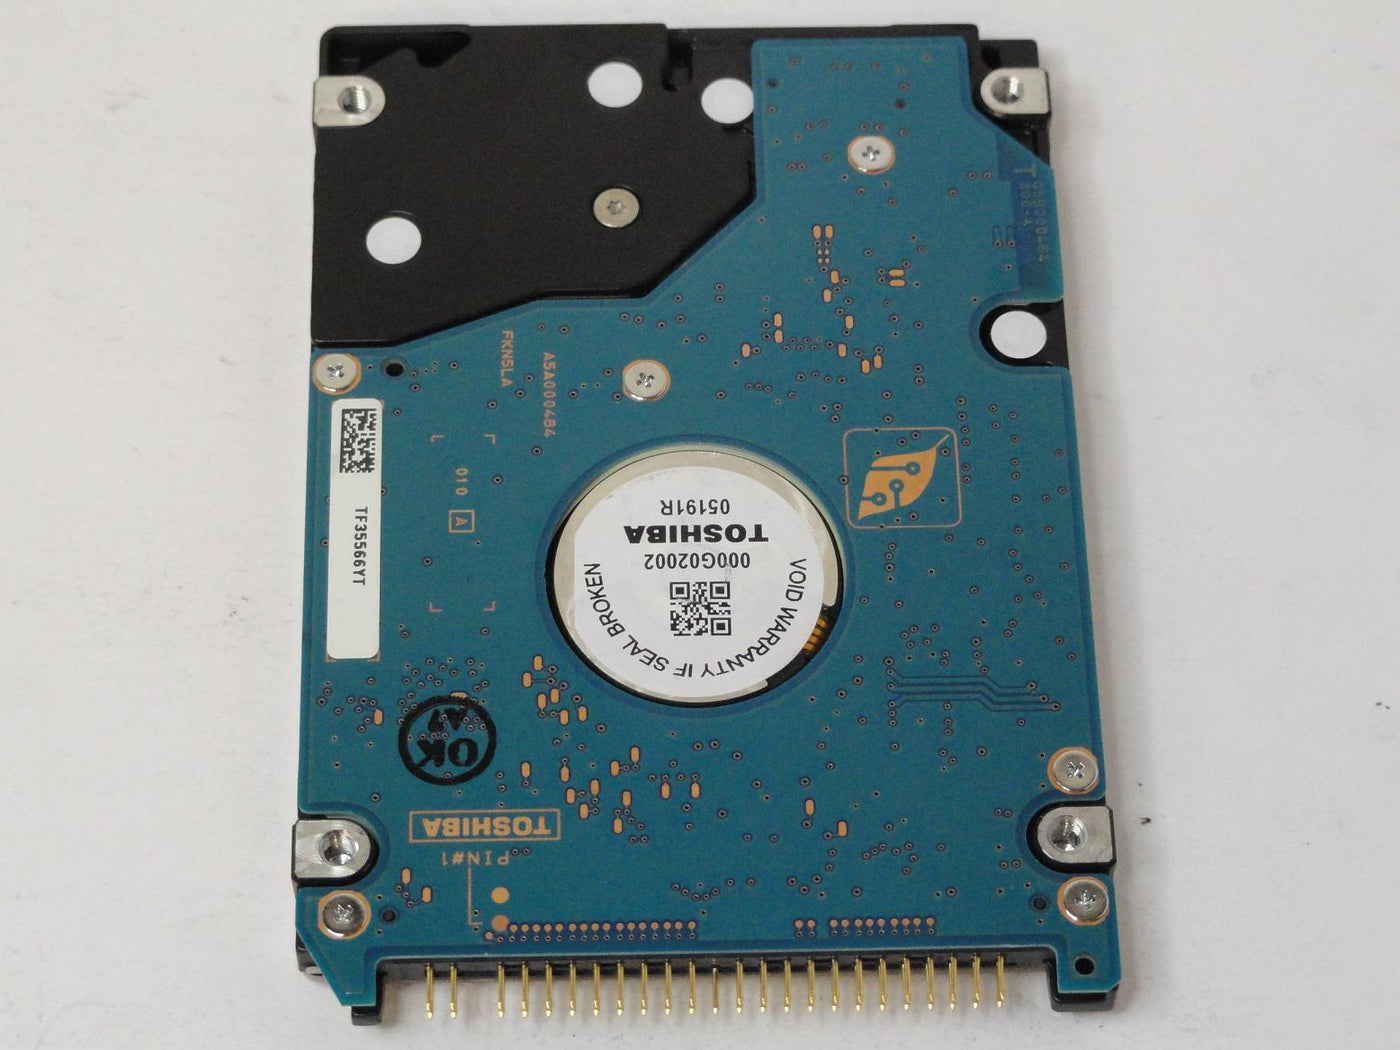 PR14898_HDD2187_Toshiba HP 20GB IDE 4200rpm 2.5in HDD - Image2